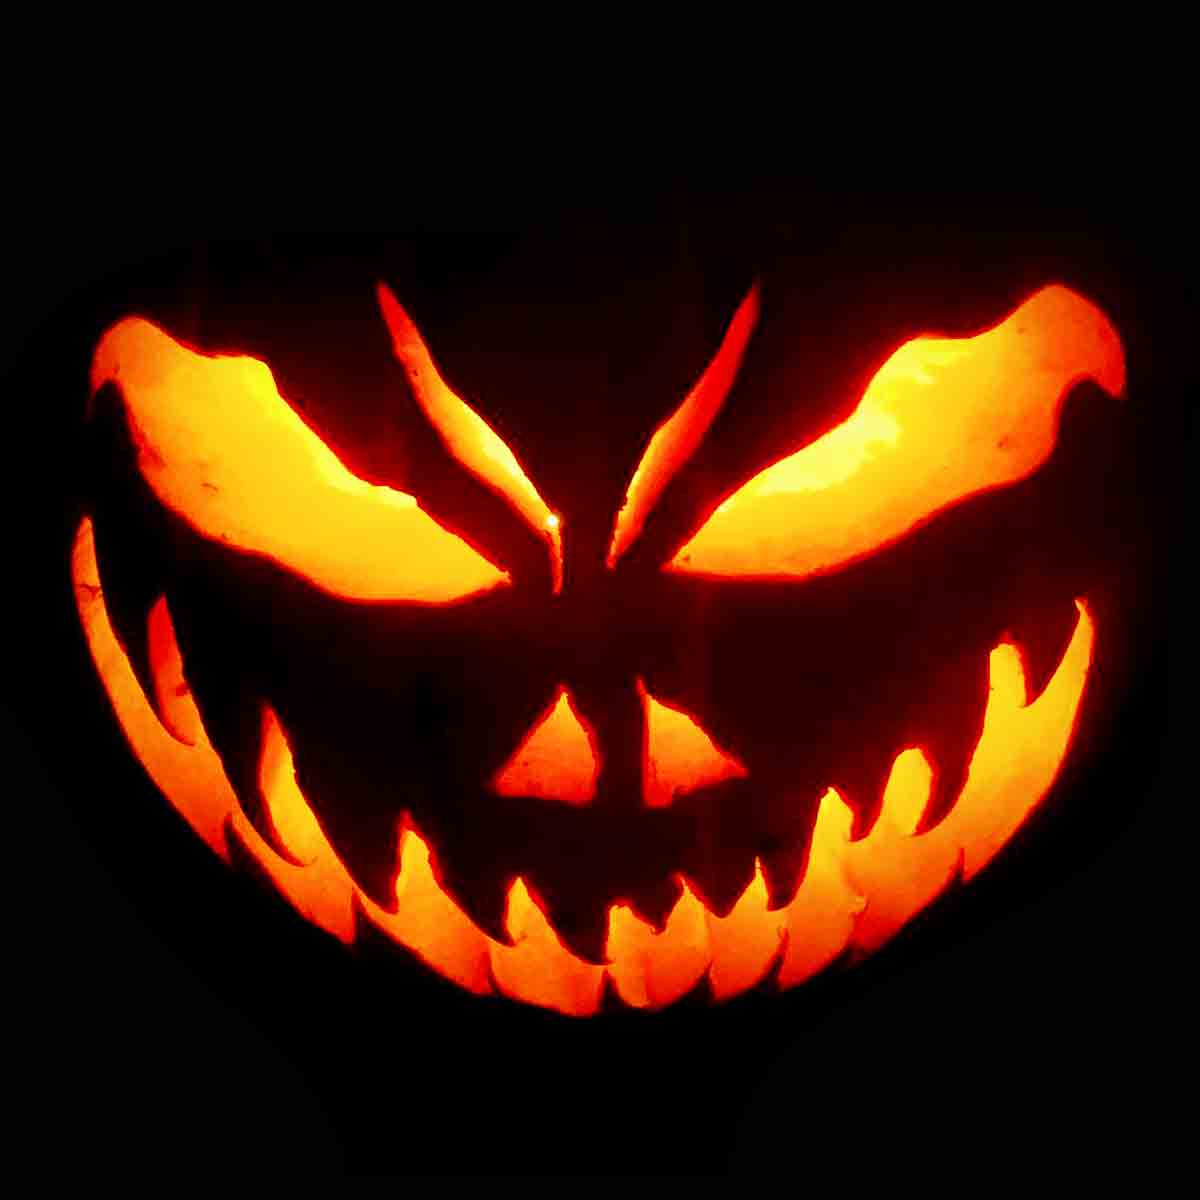 pumpkin-carving-simple-scary-and-easy-fun-youtube